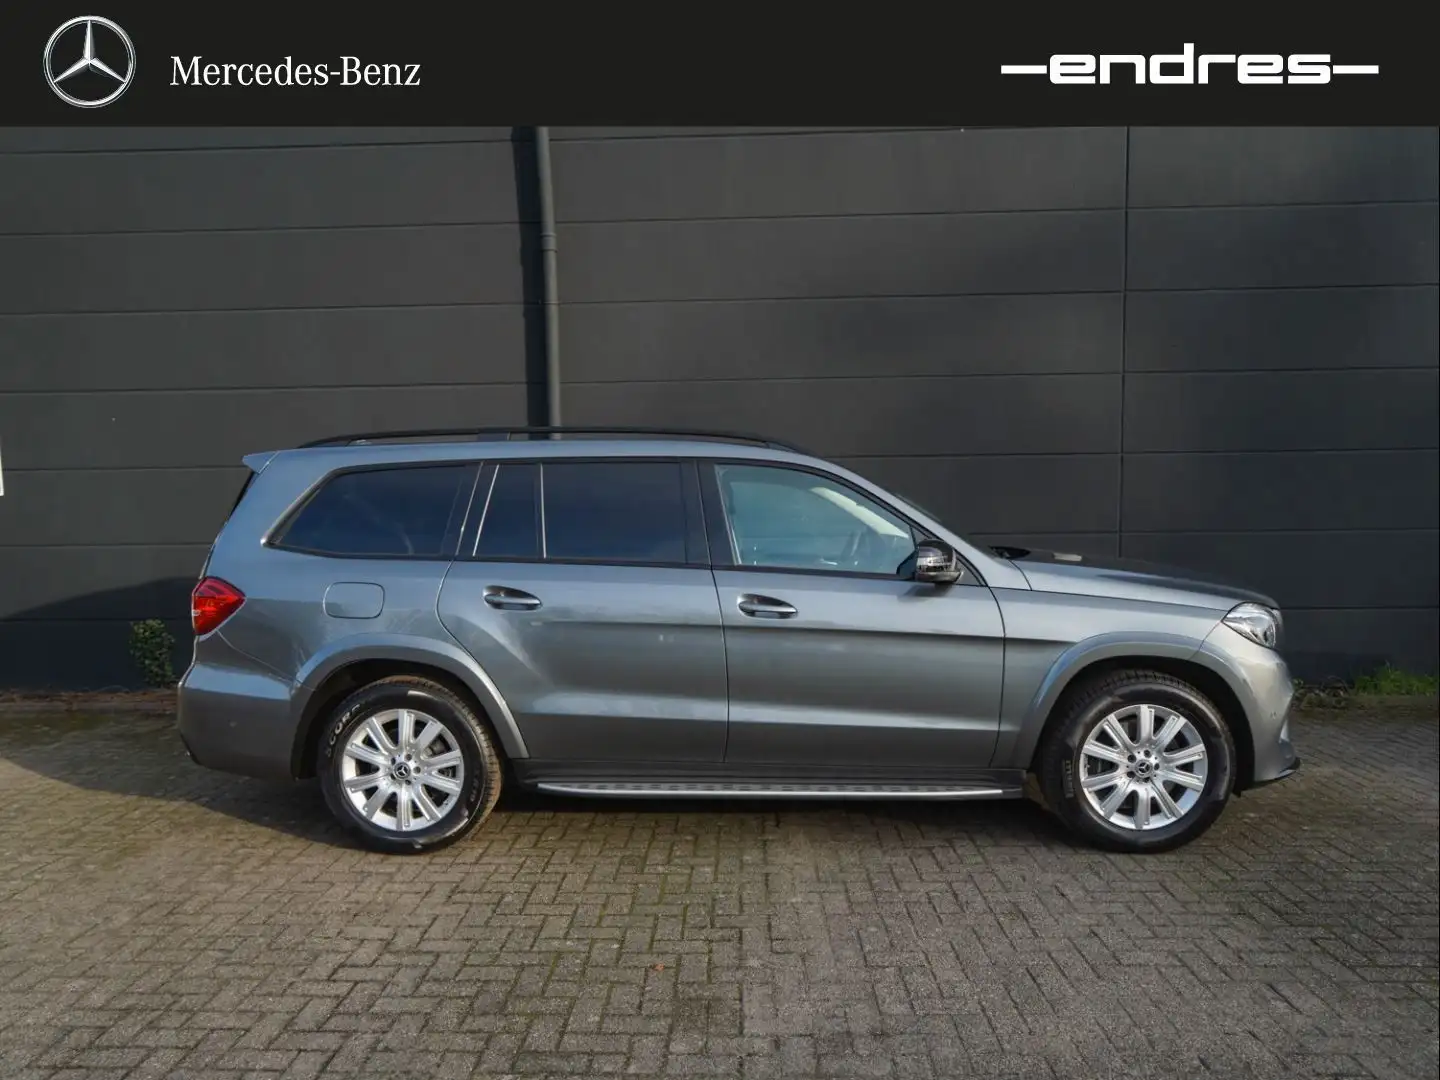 Mercedes-Benz GLS 350 d 4Matic+AMG+NIGHTPAKET+LED+STANDHEIZUNG+ siva - 2